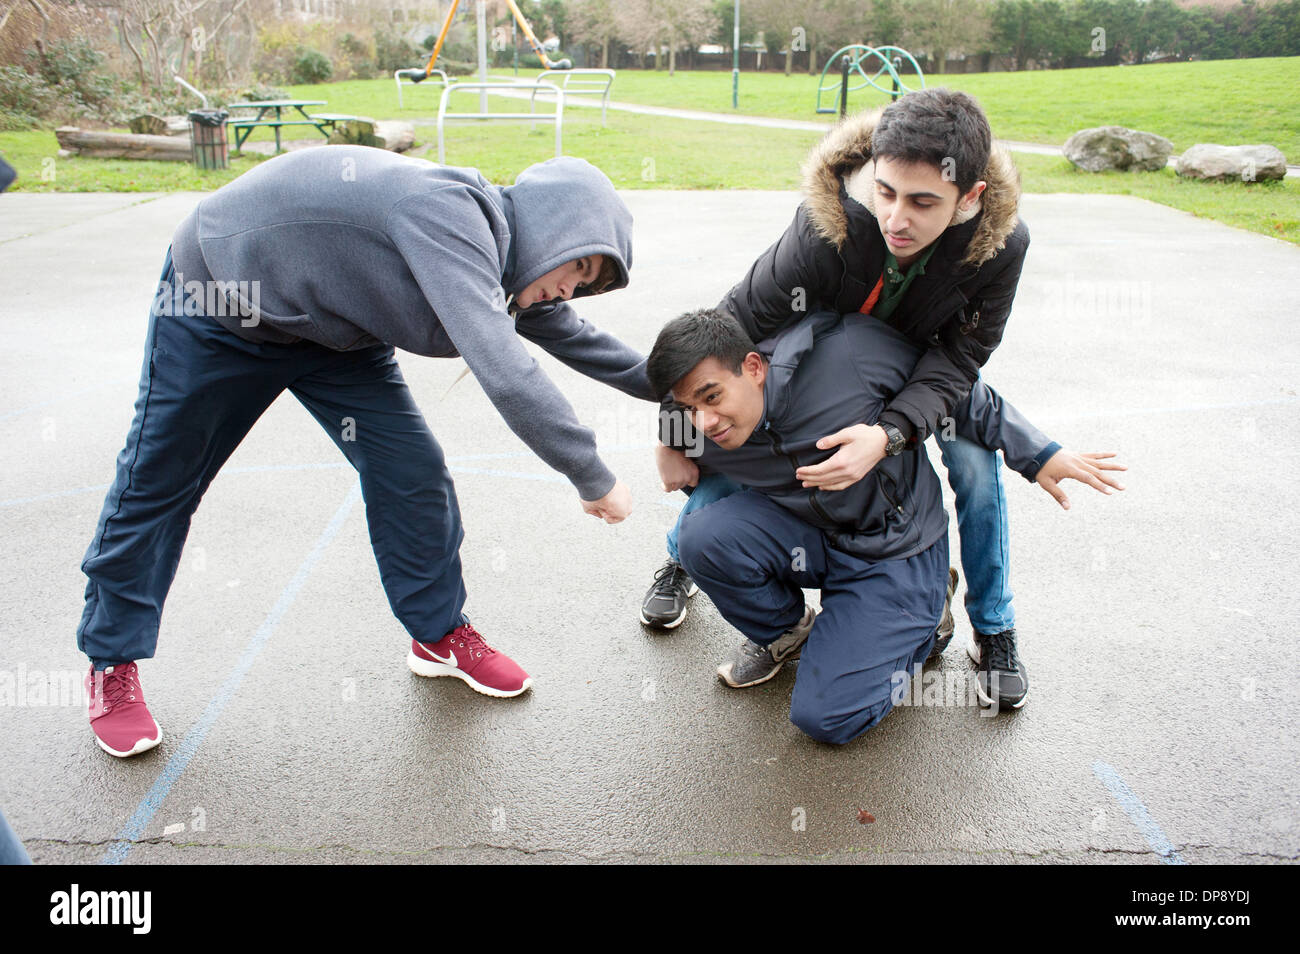 A teenage boy being assaulted by a group of boys. Stock Photo